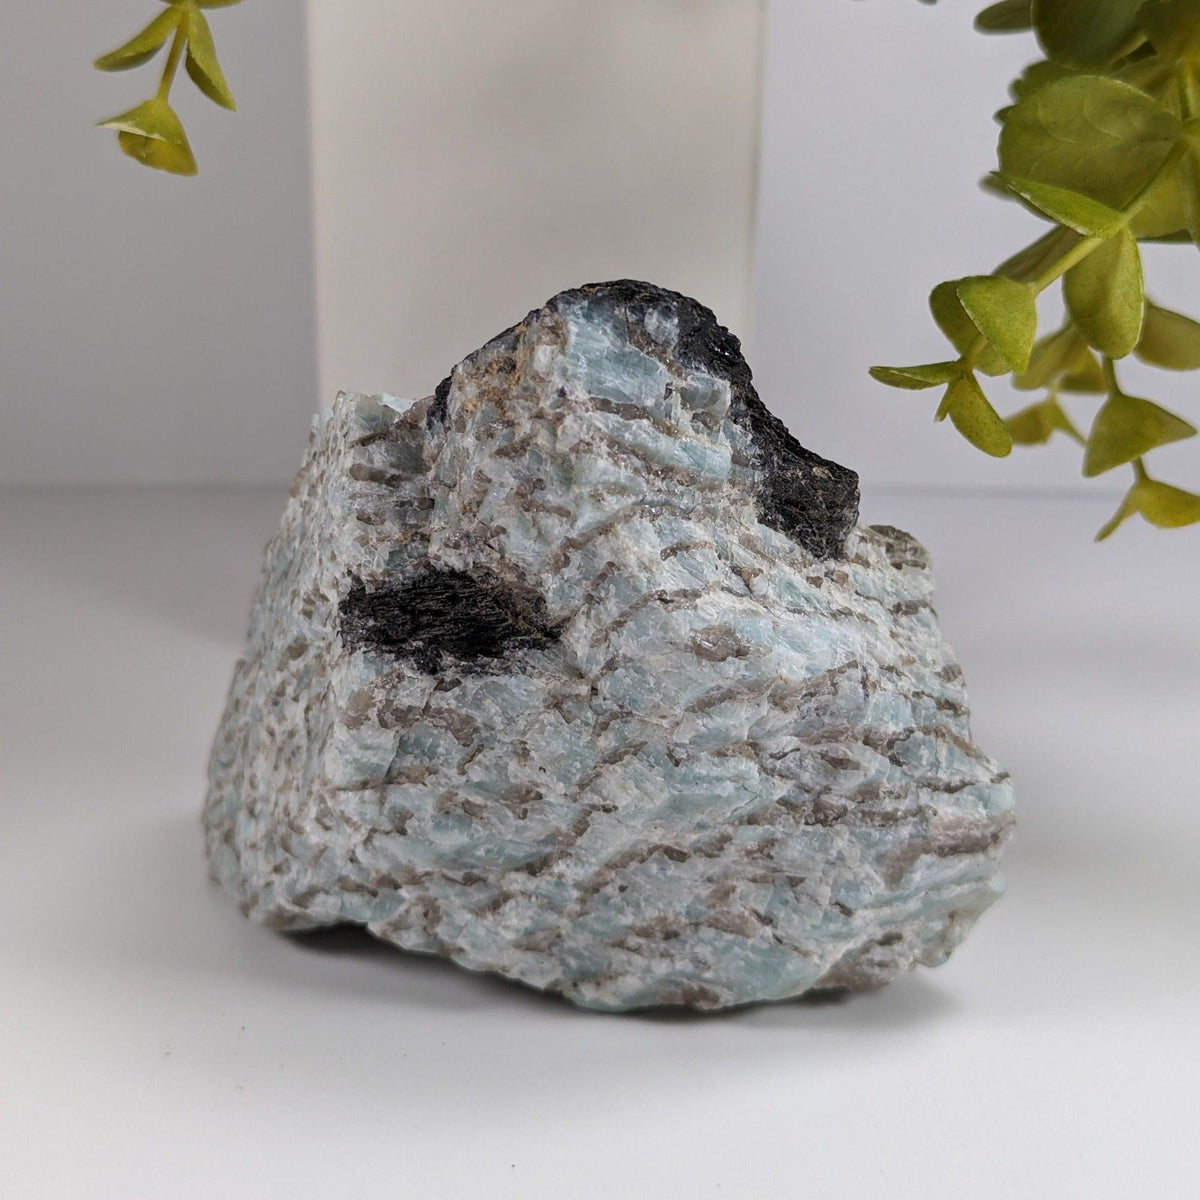 Graphic Granite | Blue-Green Amazonite and Smoky Quartz with Mica | 989 Gr | Western Quebec, Canada